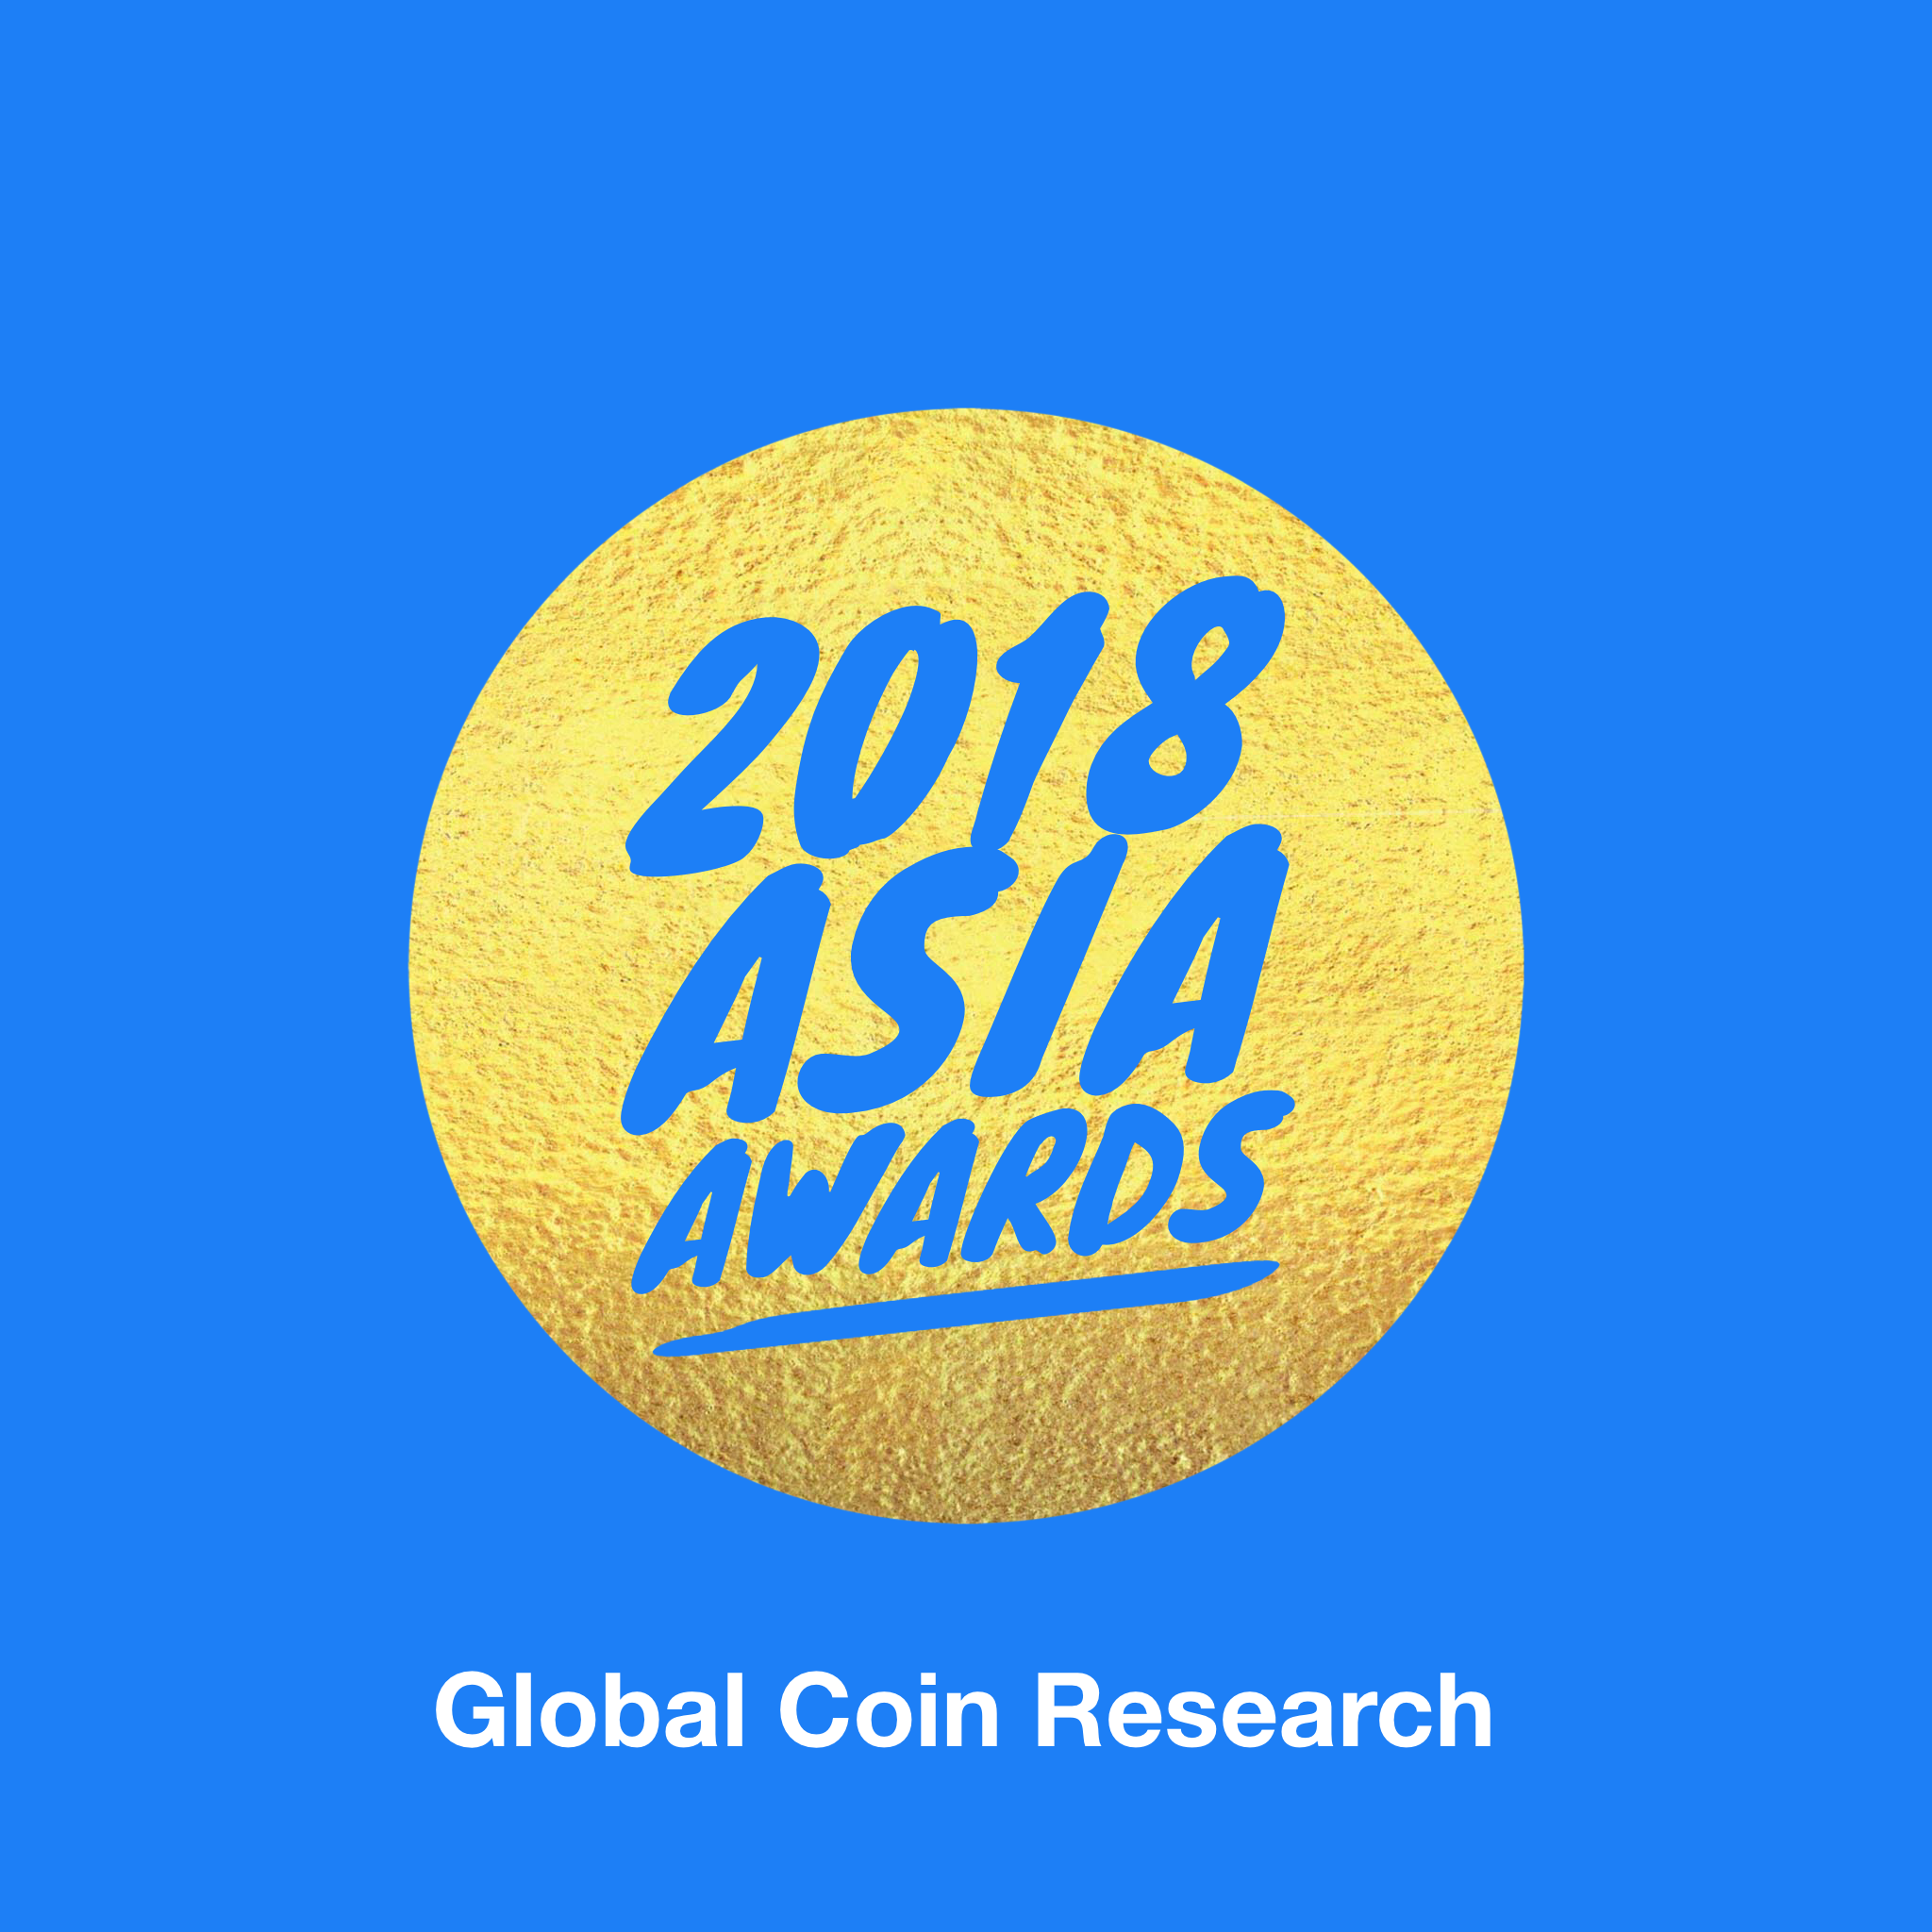 The 2018 Asia Awards: 5 Global Projects with Strong Communities in Asia